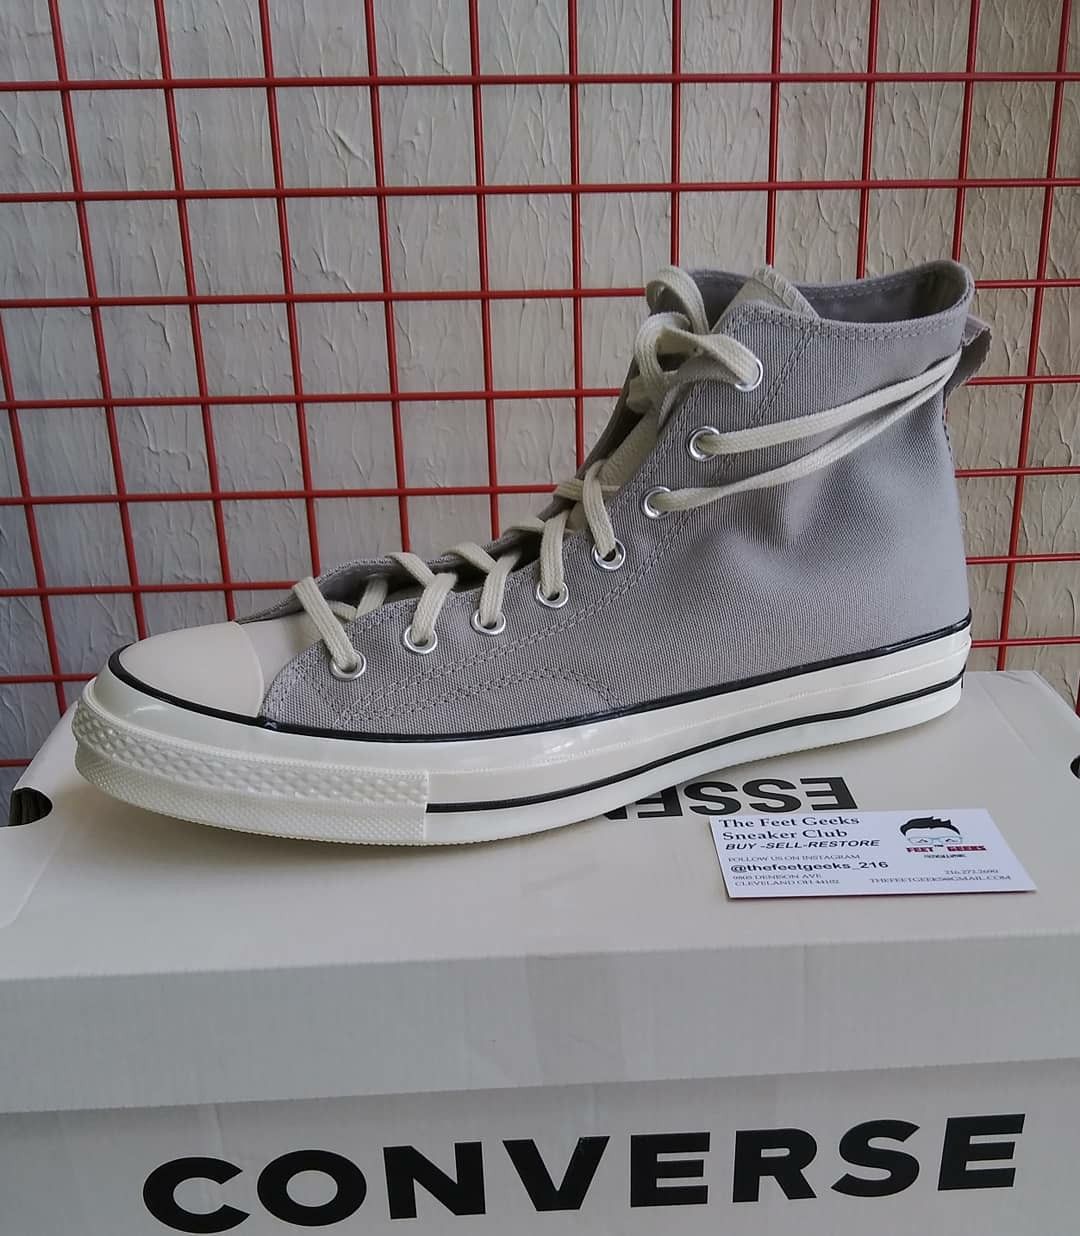 FEAR OF GOD X CONVERSE CHUCK TAYLOR ALL STAR GREY SIZE 11 US MEN SHOES NEW WITH BOX $170